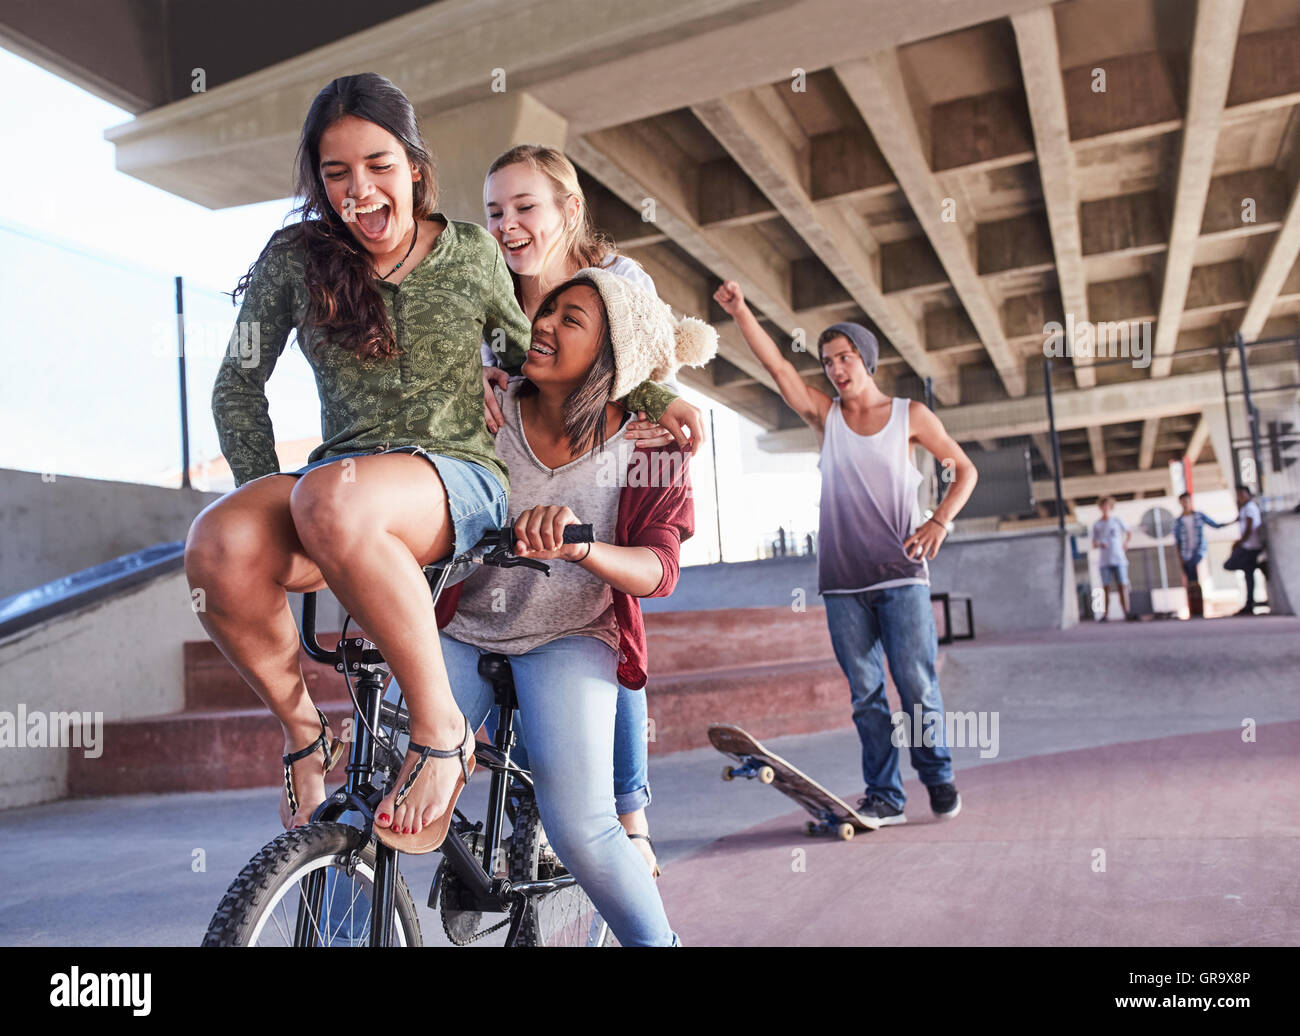 Playful teenage friends riding BMX bicycle and skateboarding at skate park  Stock Photo - Alamy